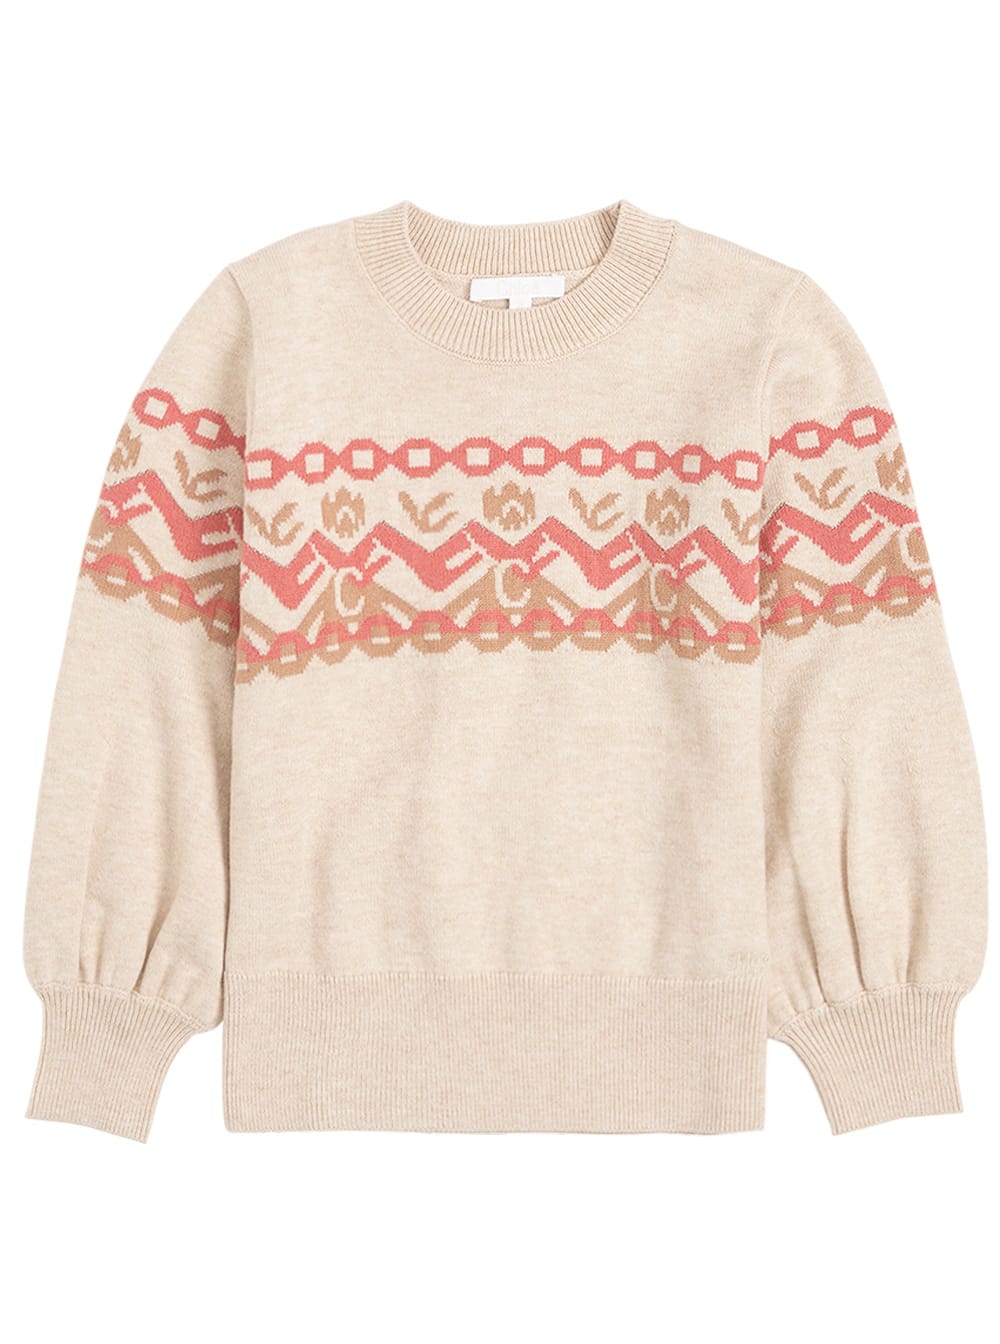 Chloé Pink Wool And Cotton Sweater With Ikat Motif